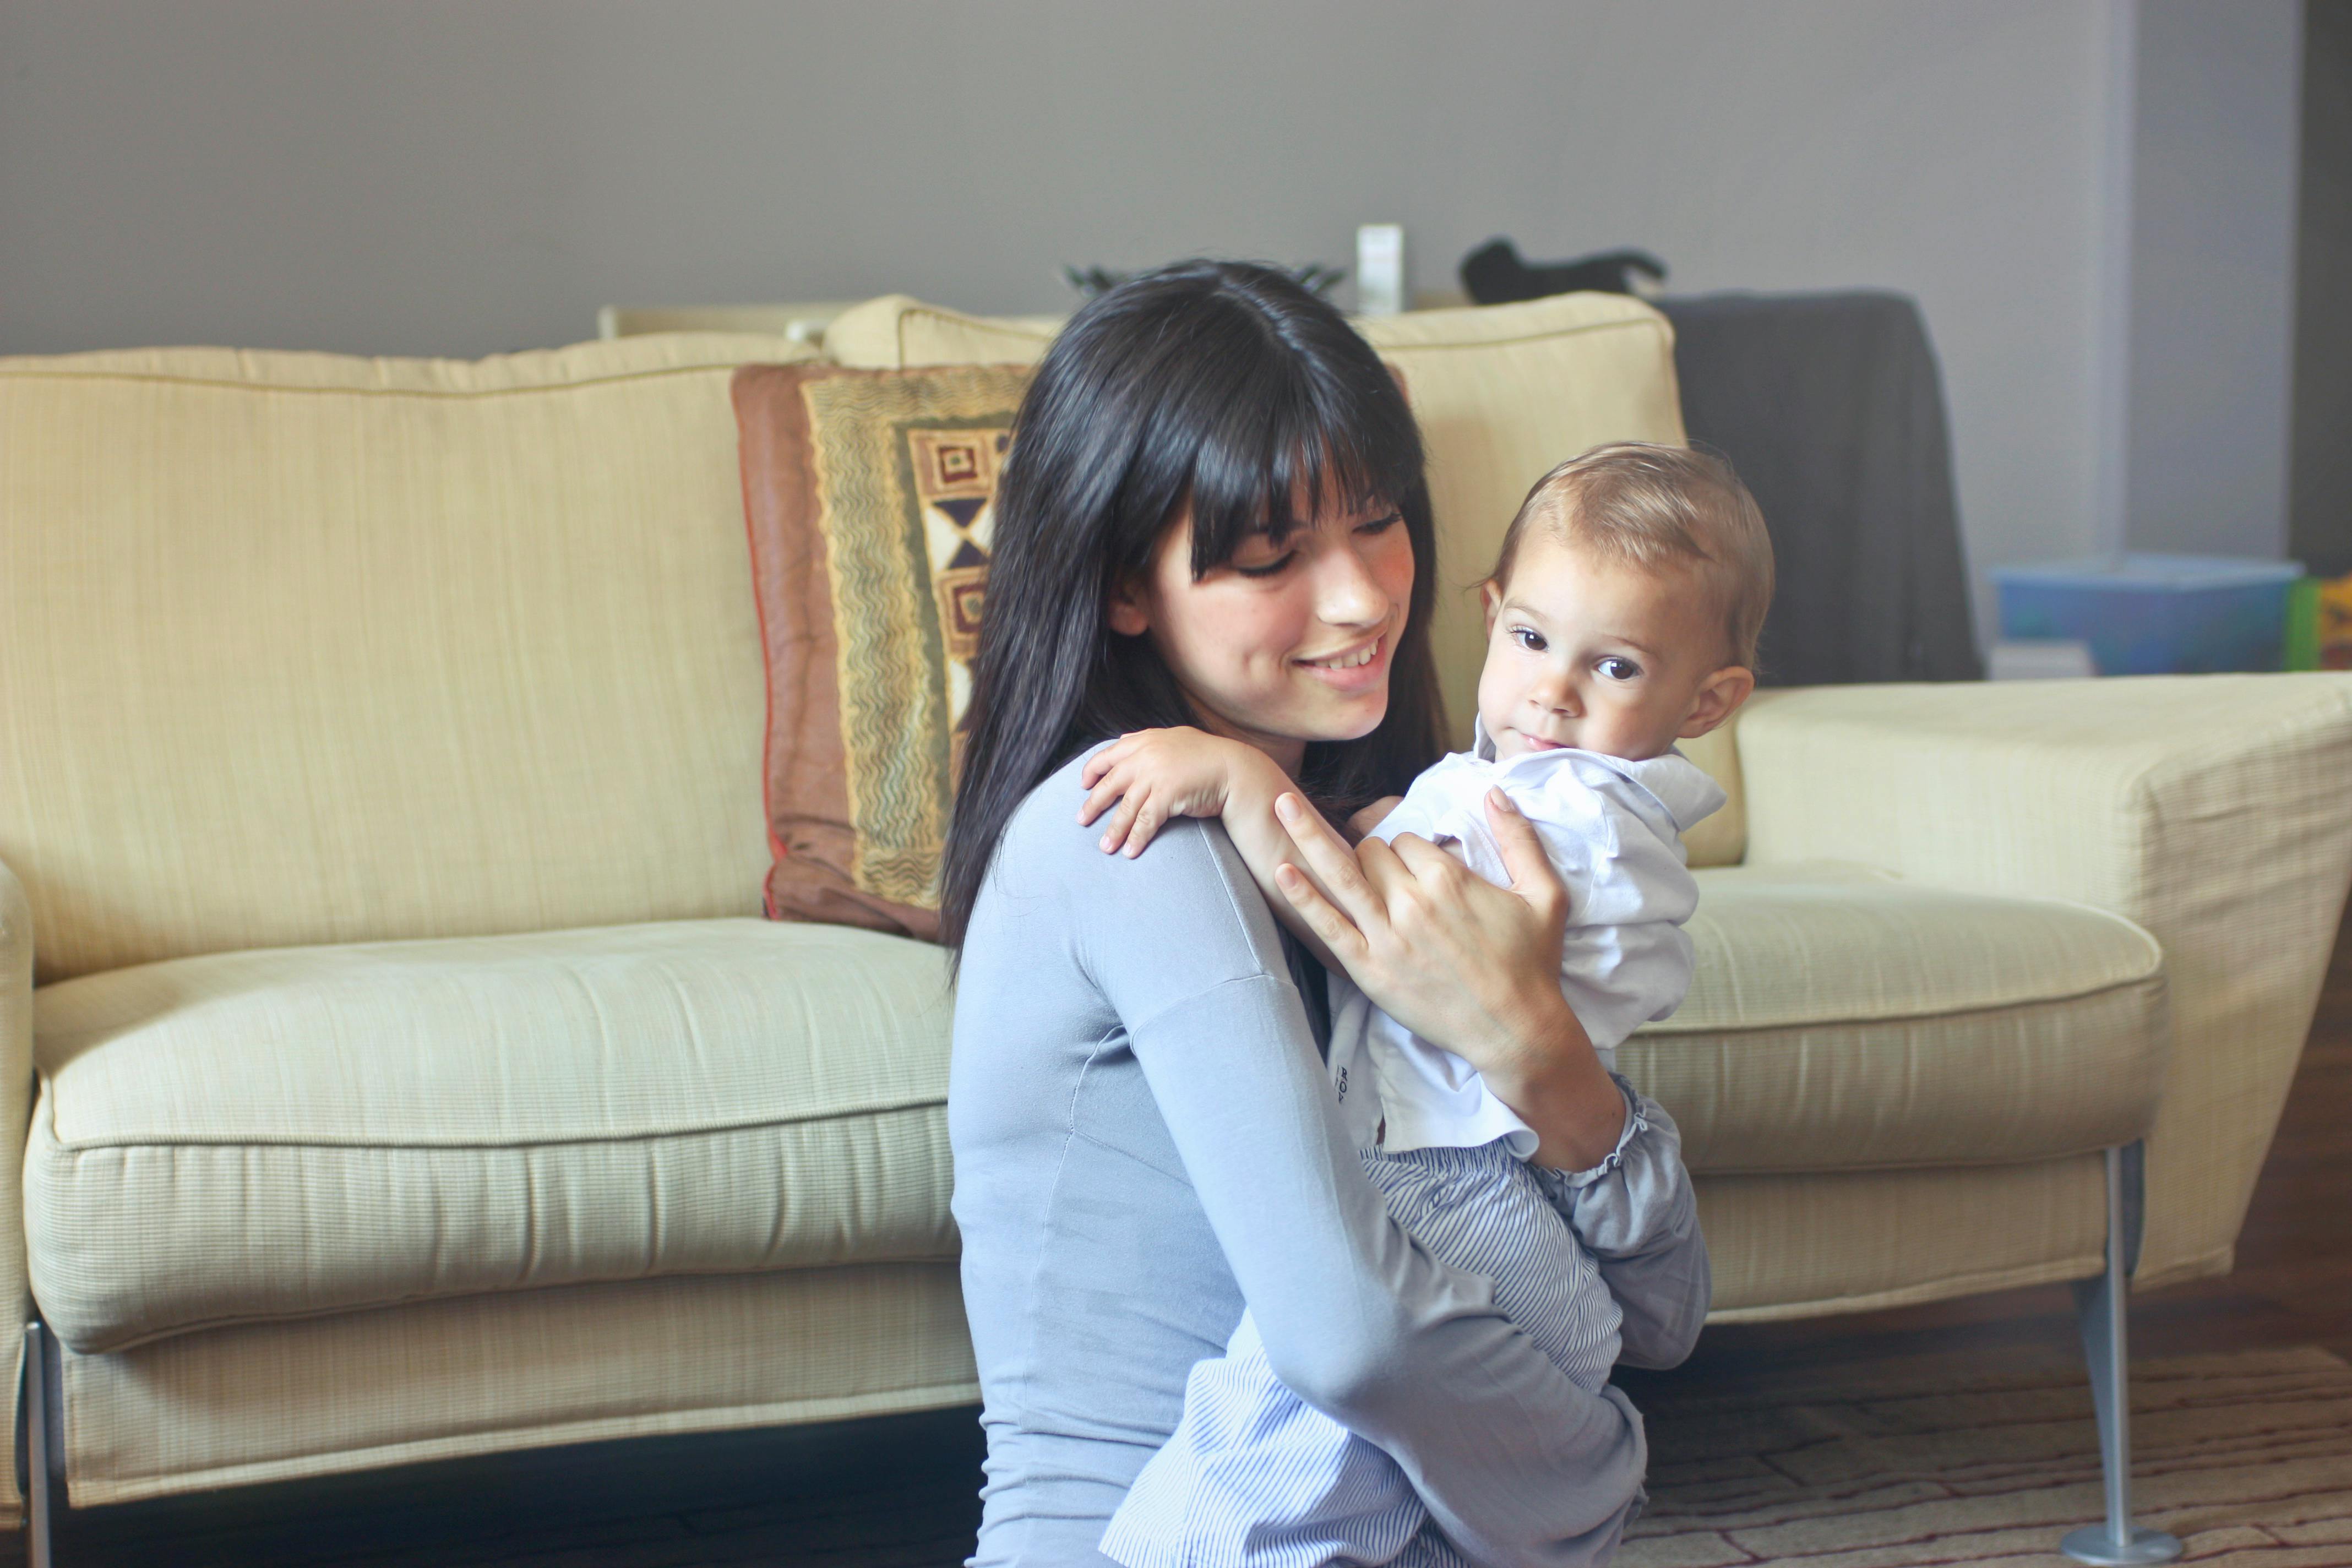 A nanny with a baby | Source: Pexels